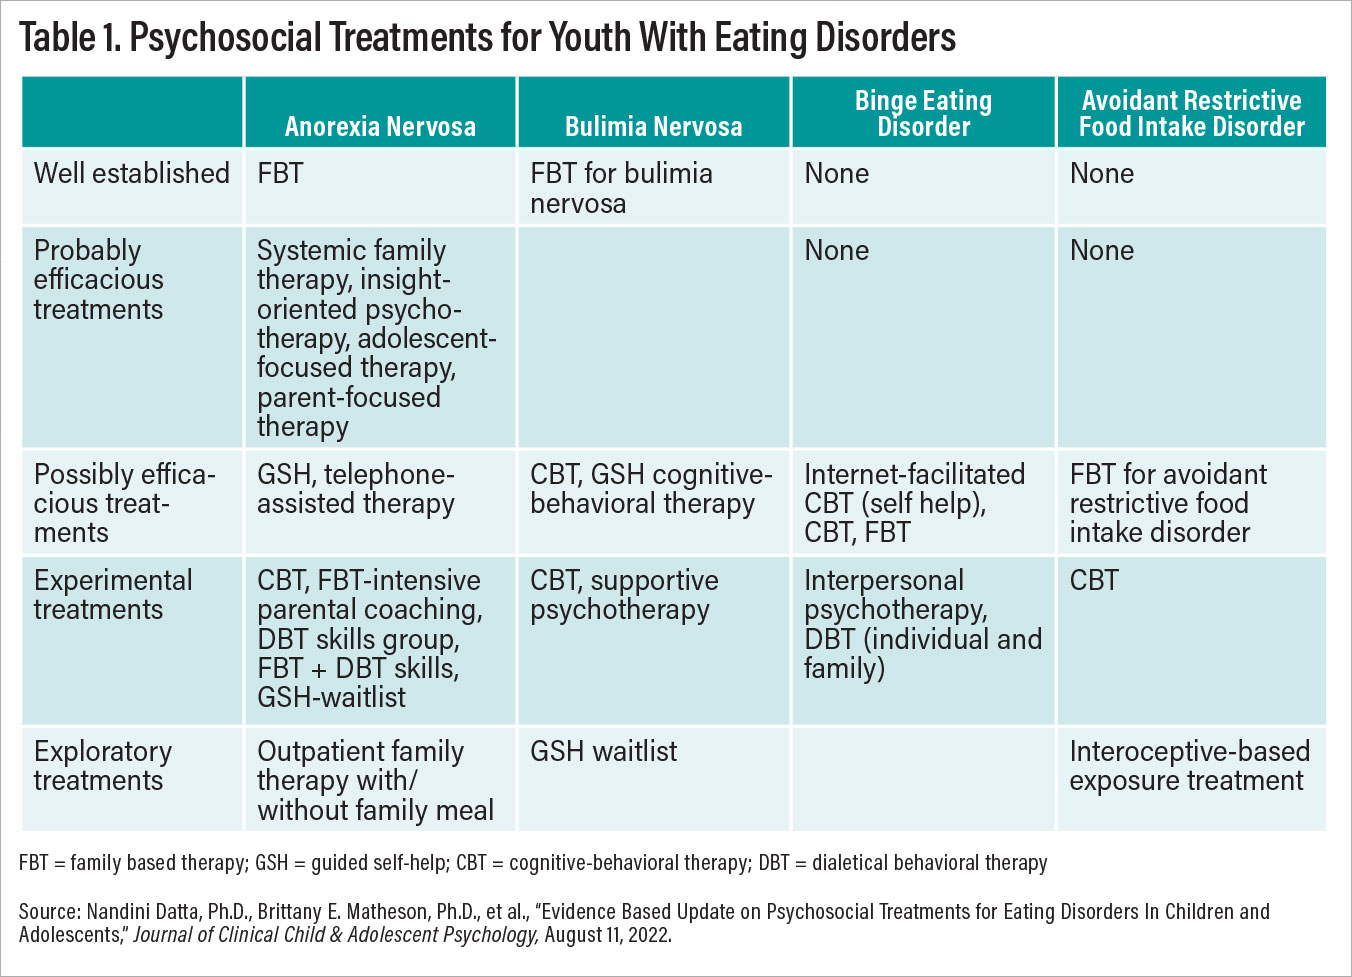 Psychosocial treatments for youth with eating disorders